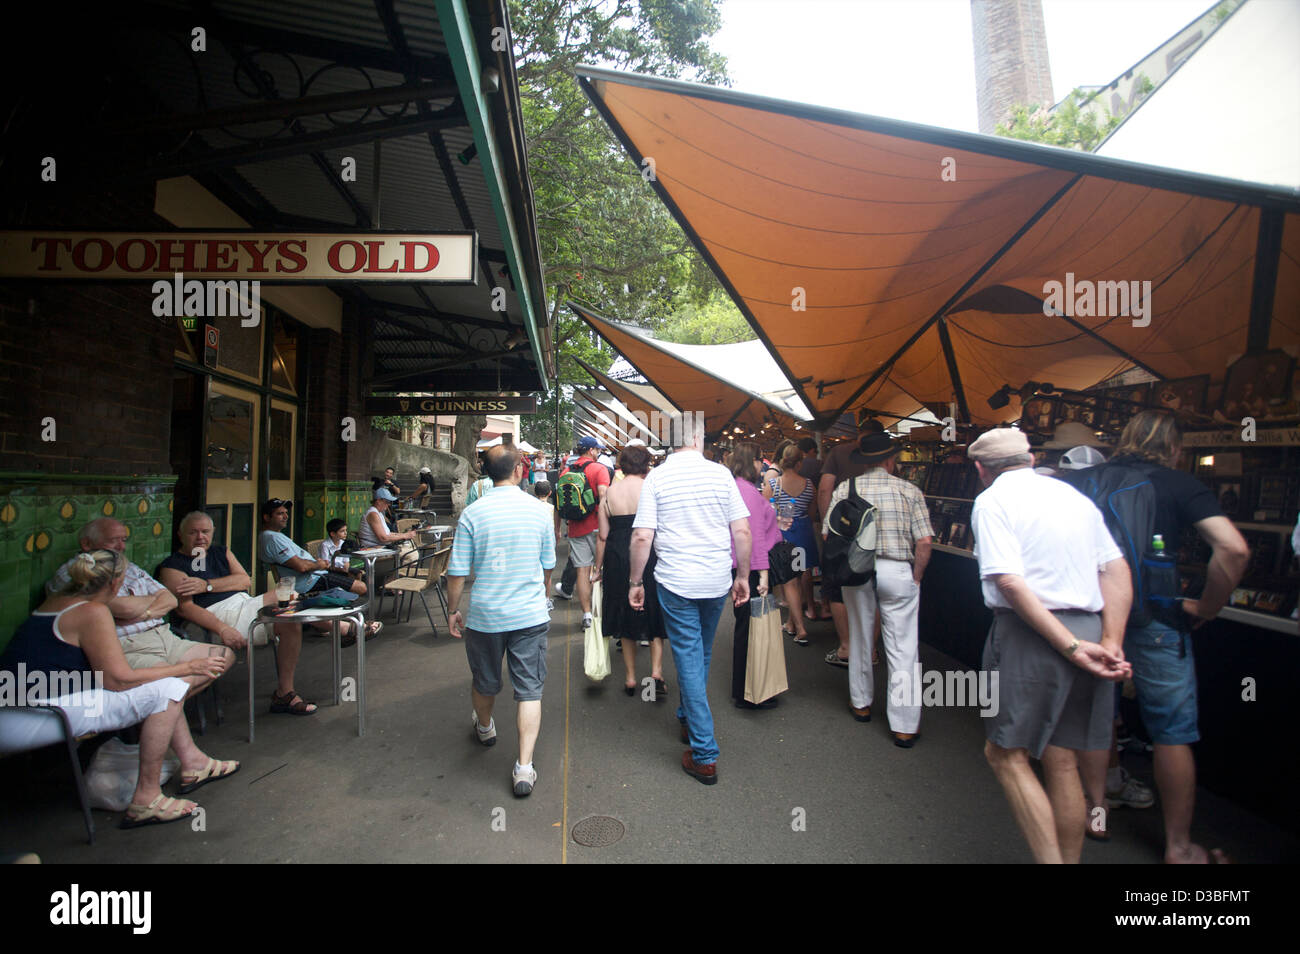 The shopping area in downtown Sydney NSW Australia known as "The Rocks" Stock Photo